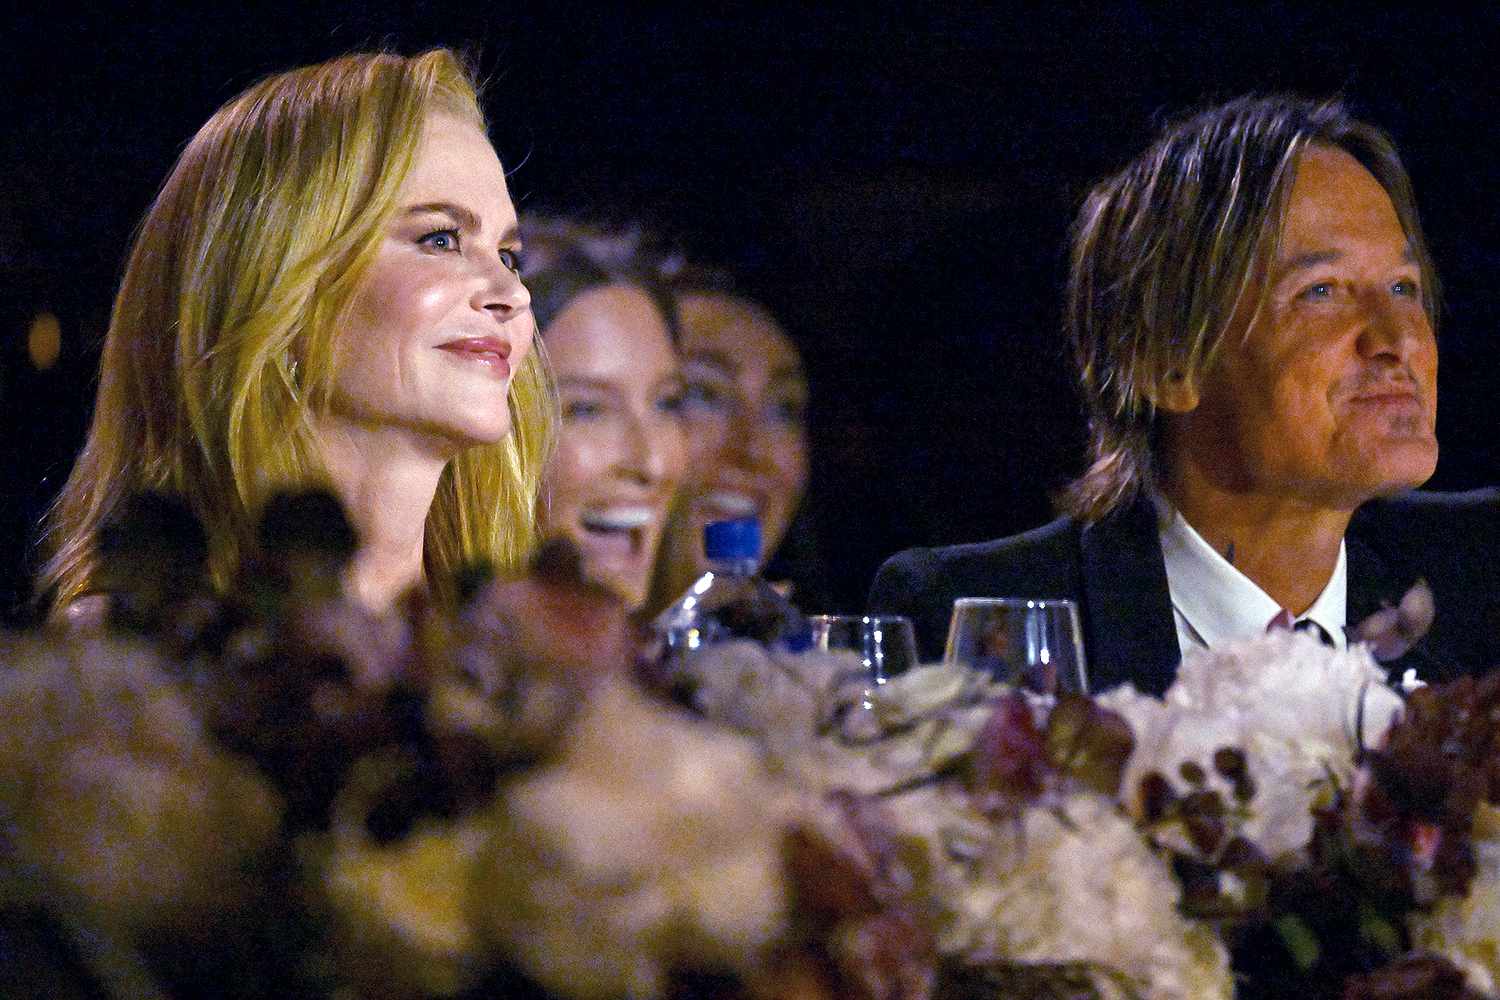 LOS ANGELES, CALIFORNIA - APRIL 27: (L-R) Nicole Kidman and Keith Urban attend the 49th AFI Life Achievement Award: A Tribute To Nicole Kidman at Dolby Theatre on April 27, 2024 in Los Angeles, California